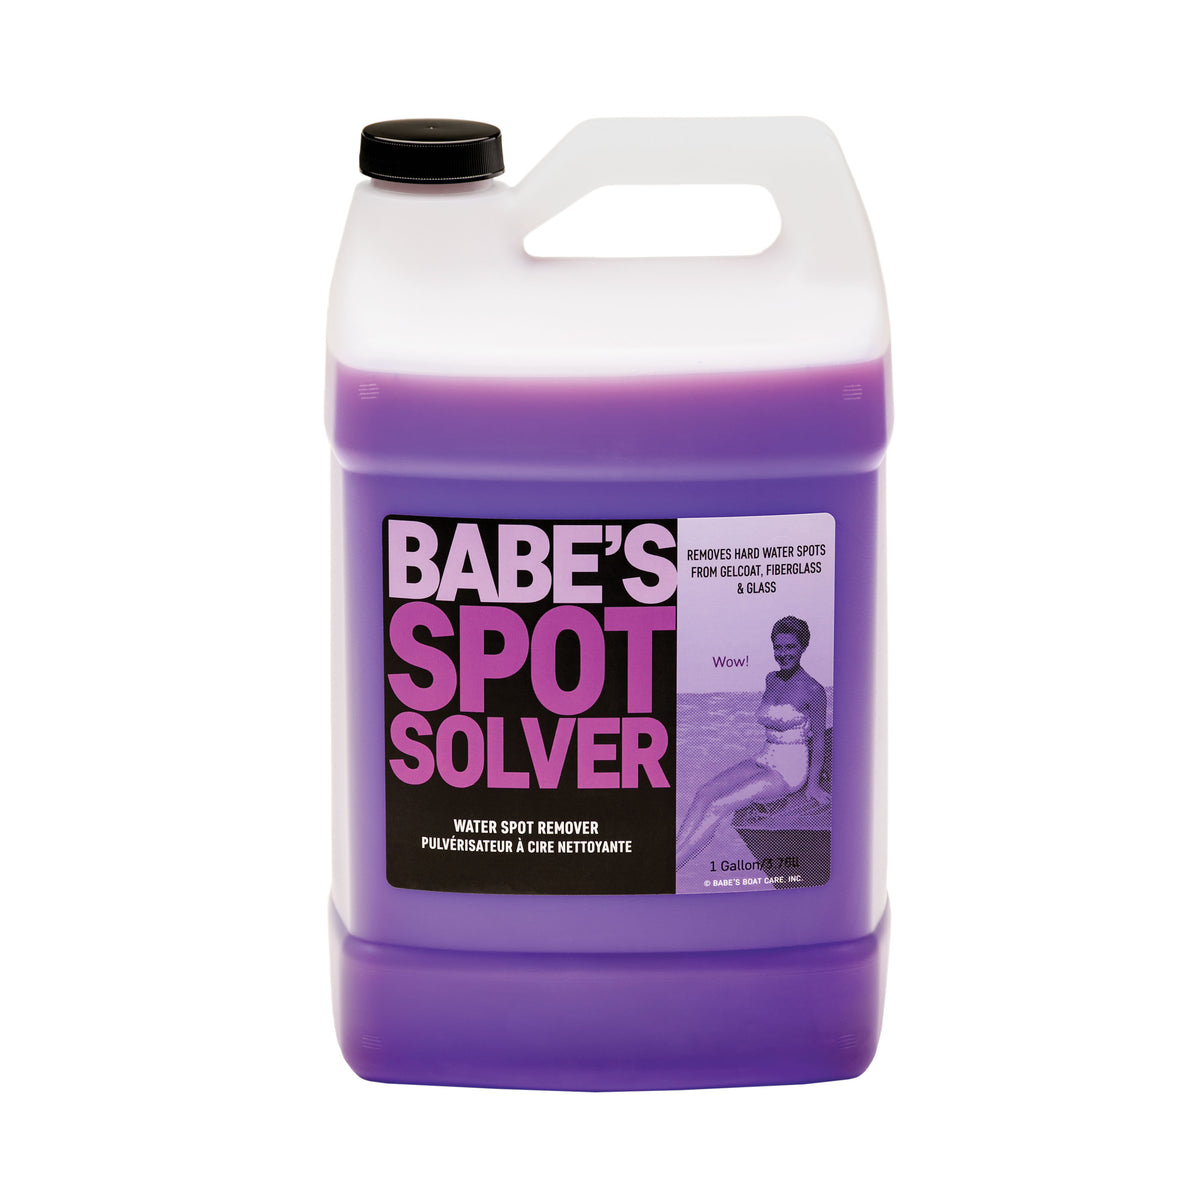 BABE'S Boat Care Products BB8101 Spot Solver - 1 Gallon